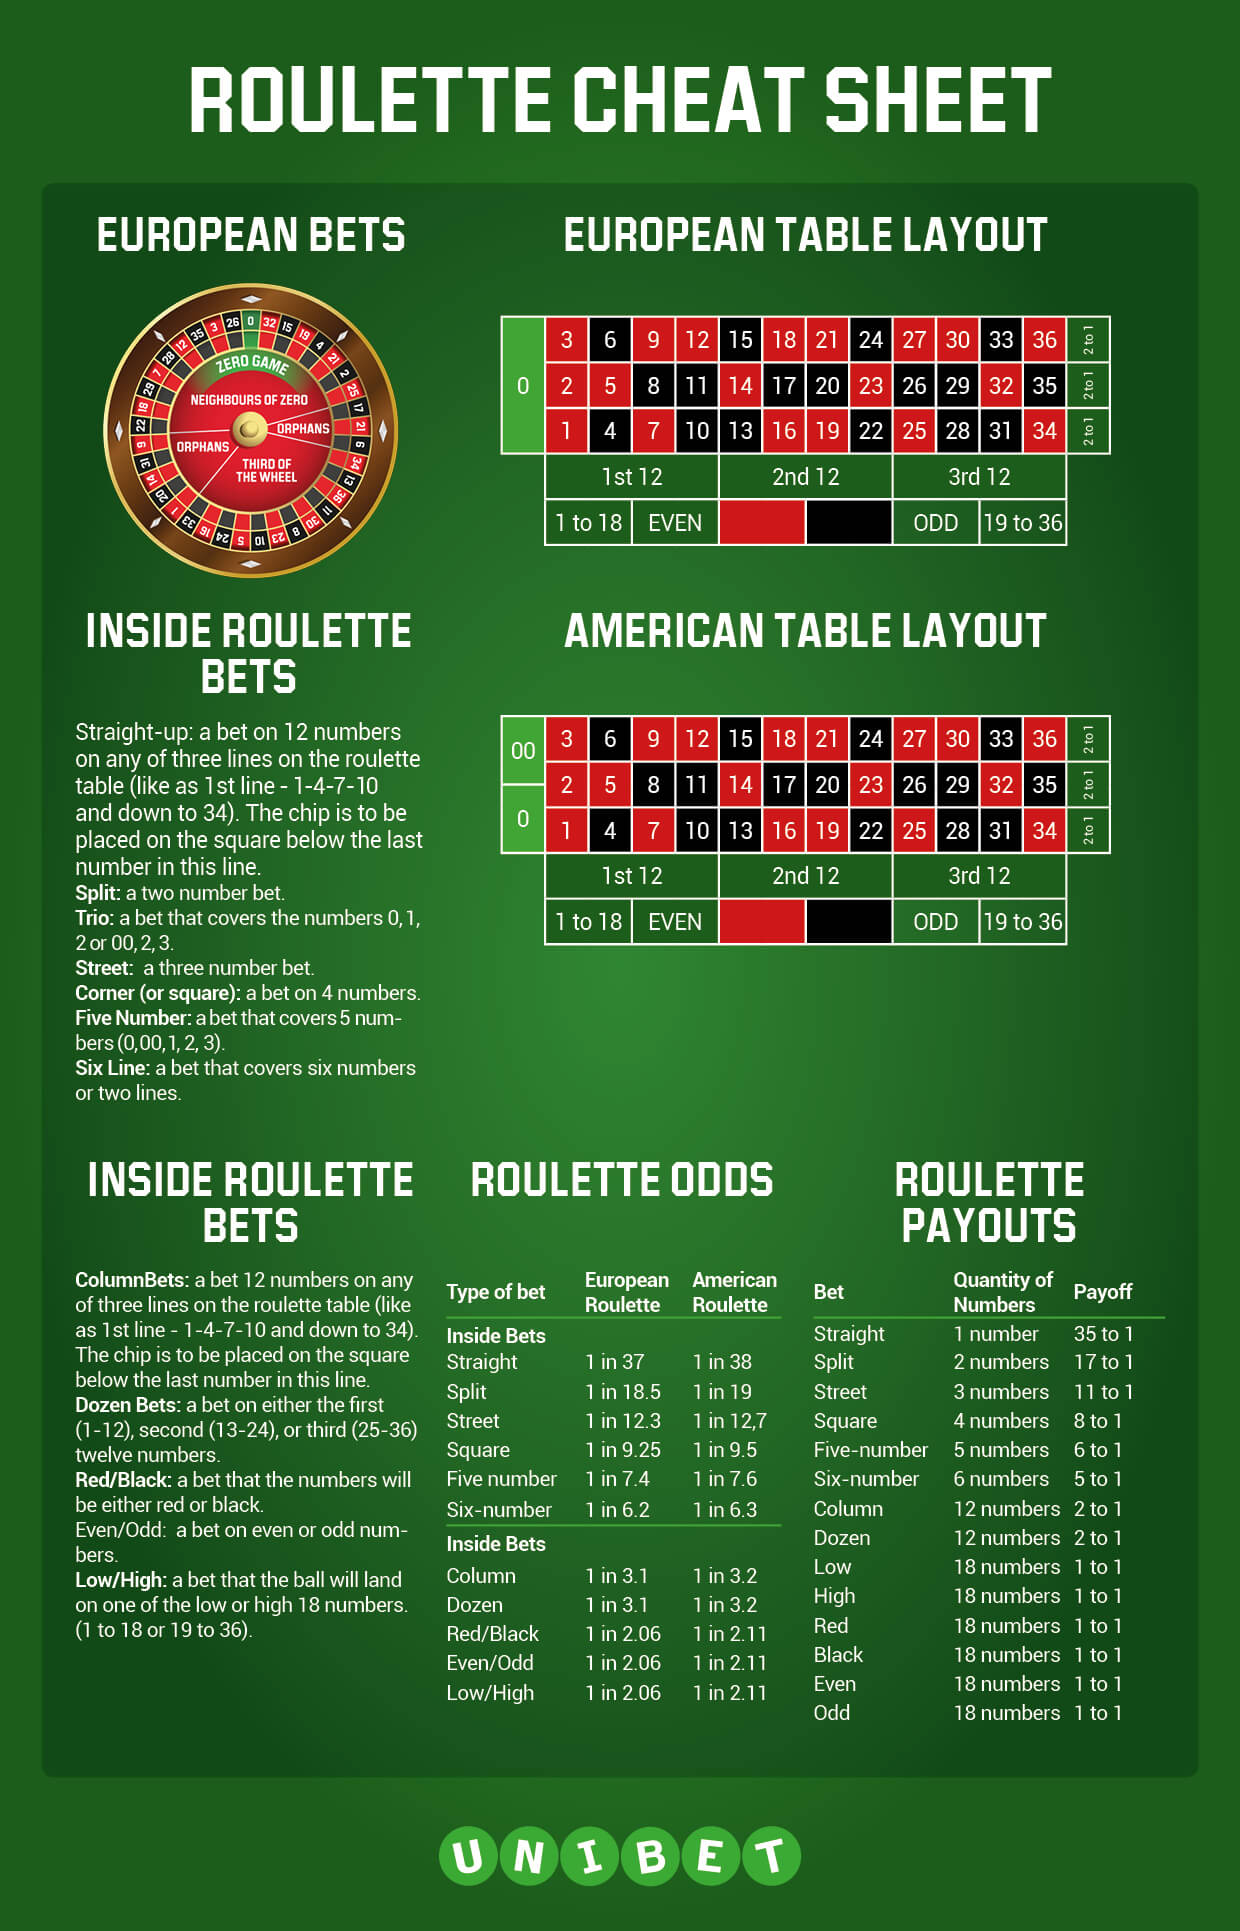 how much does green pay on roulette